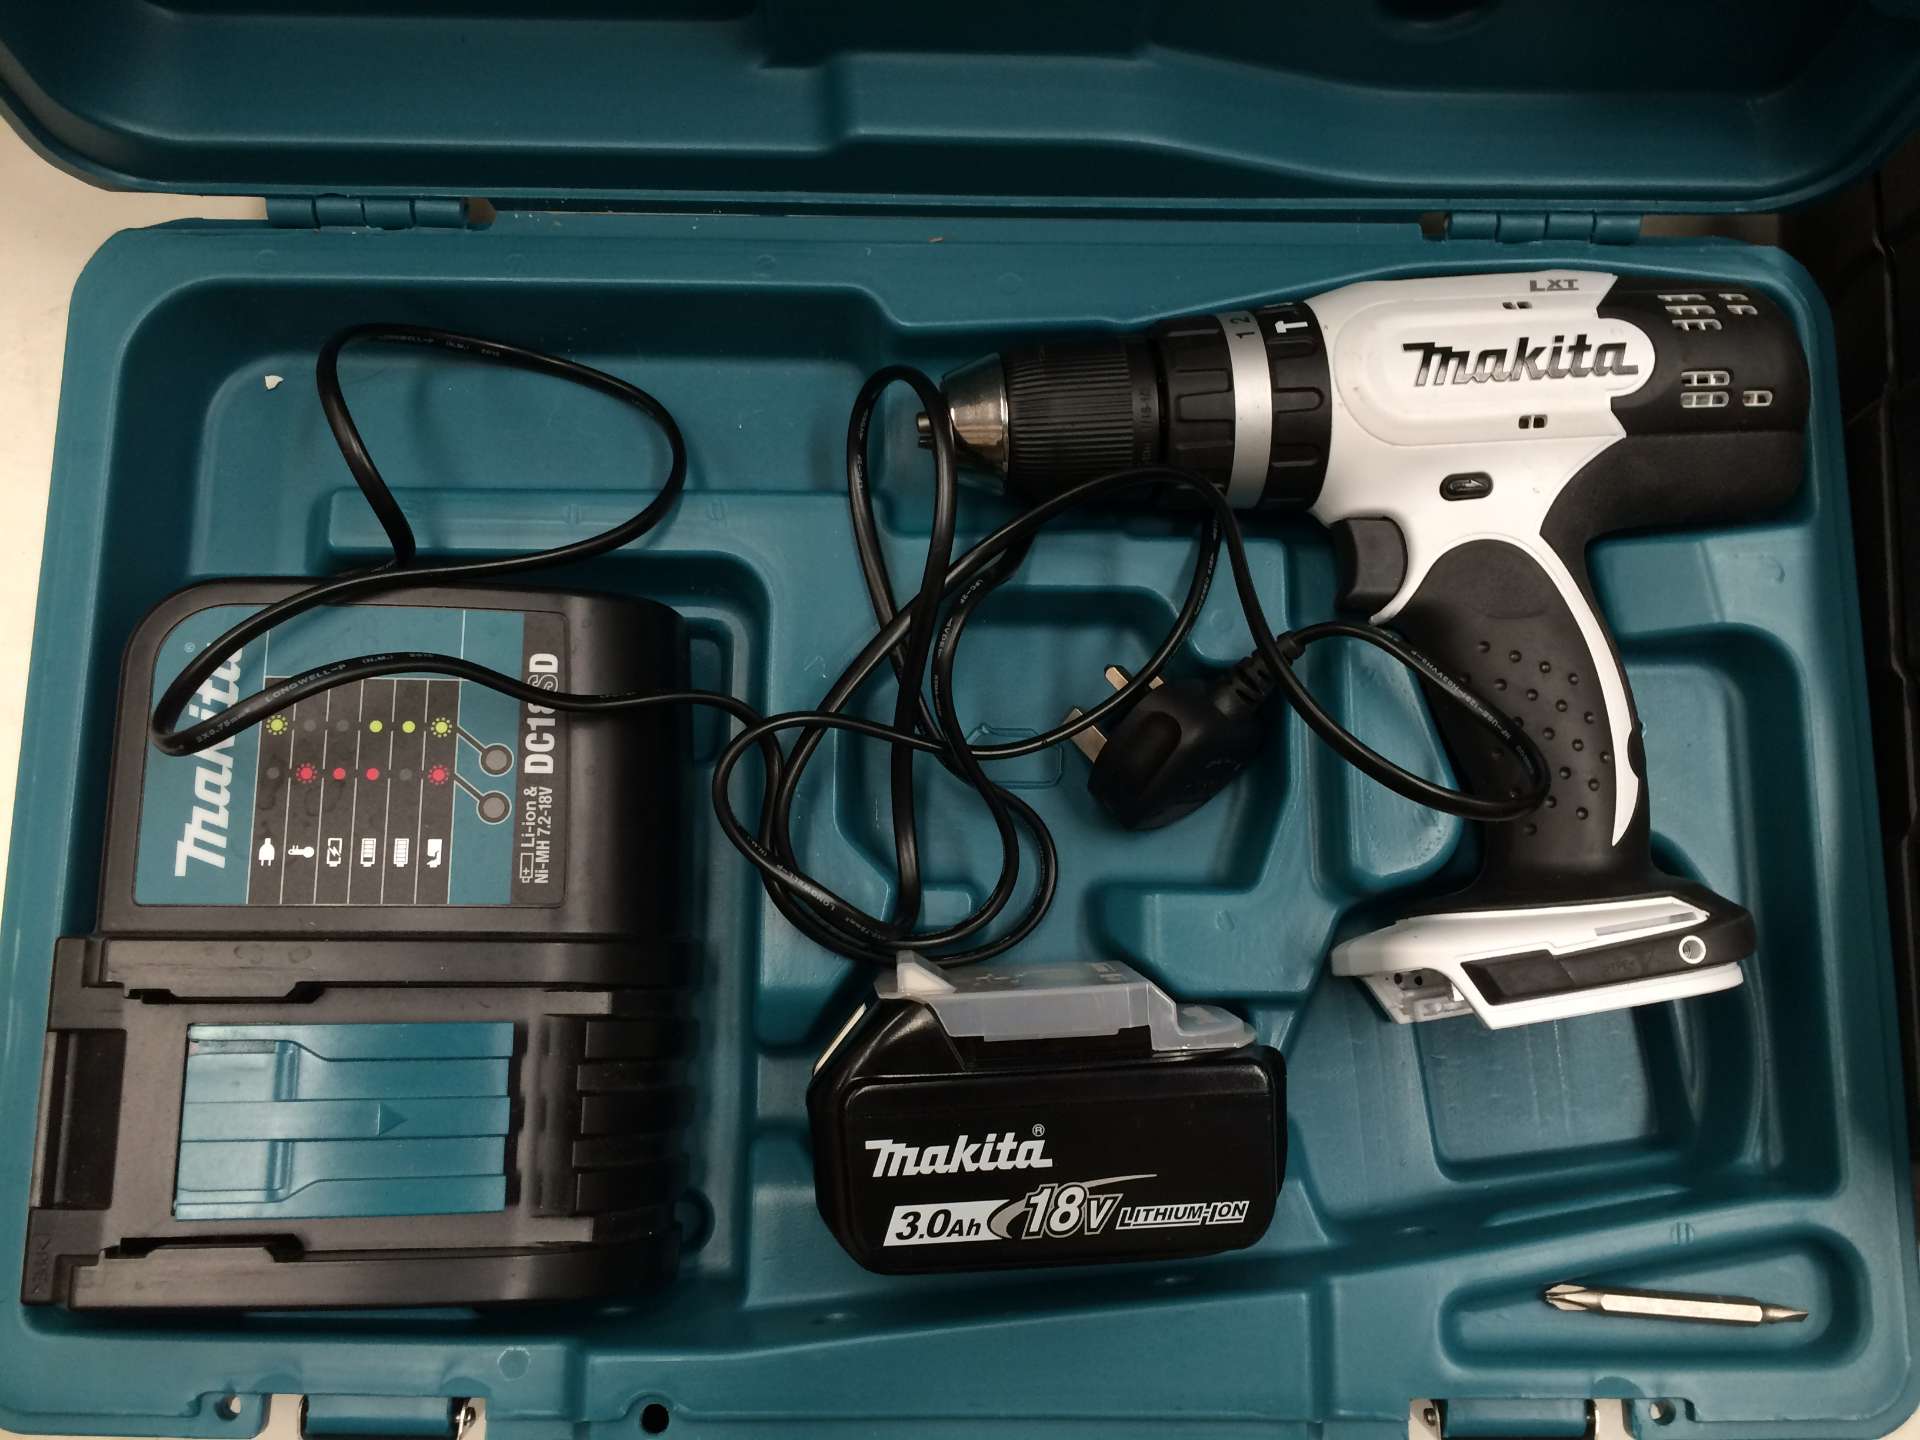 Makita DHP453 18v cordless hammer drill in case complete with one - (3.